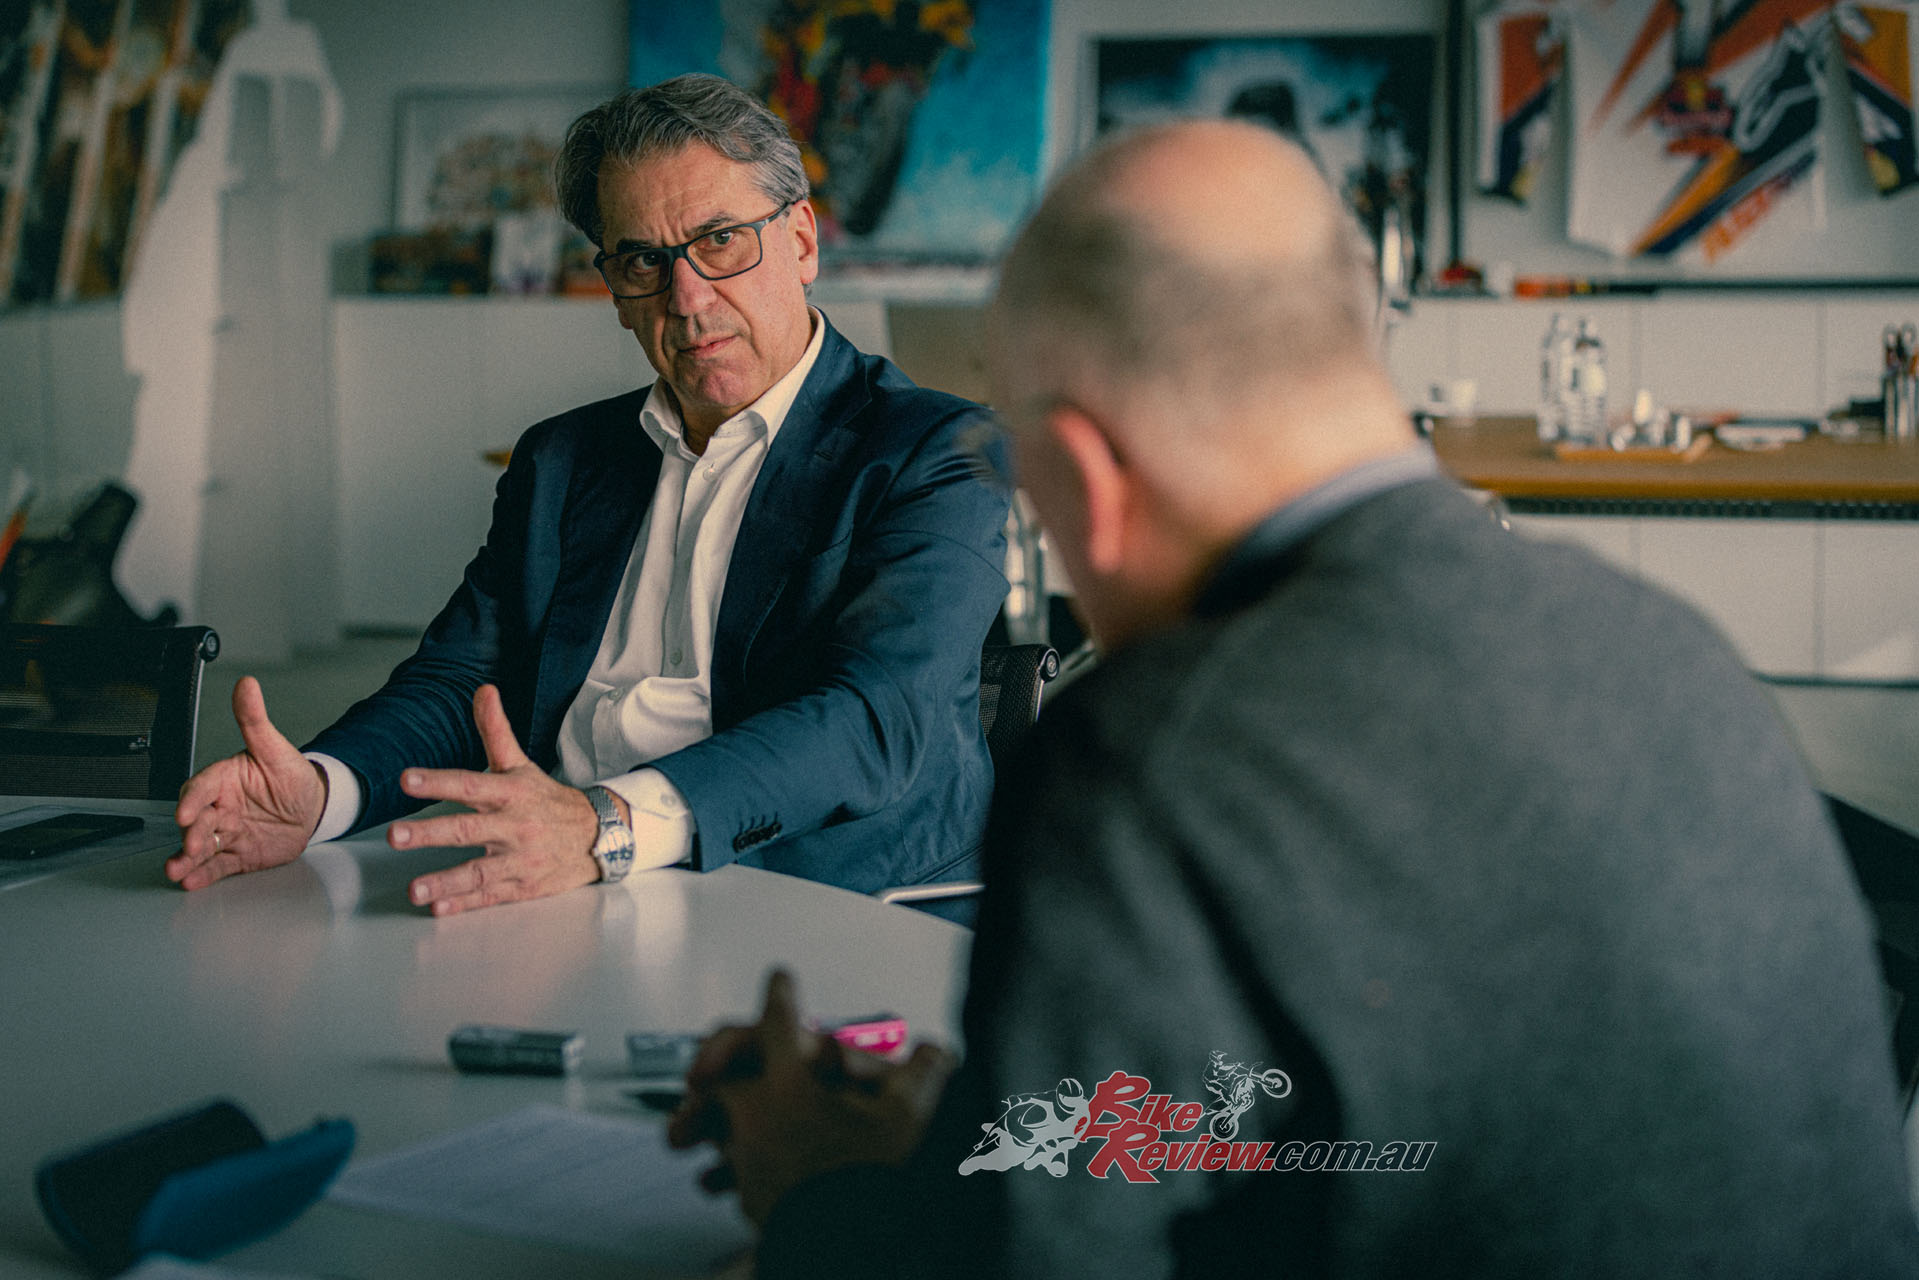 Pierer Mobility AG President/CEO Stefan Pierer, 66, is the hands-on boss of Europe’s largest motorcycle manufacturer, which besides KTM, Husqvarna, GASGAS and Felt bicycles, and as well as a joint venture with China’s CFMOTO.